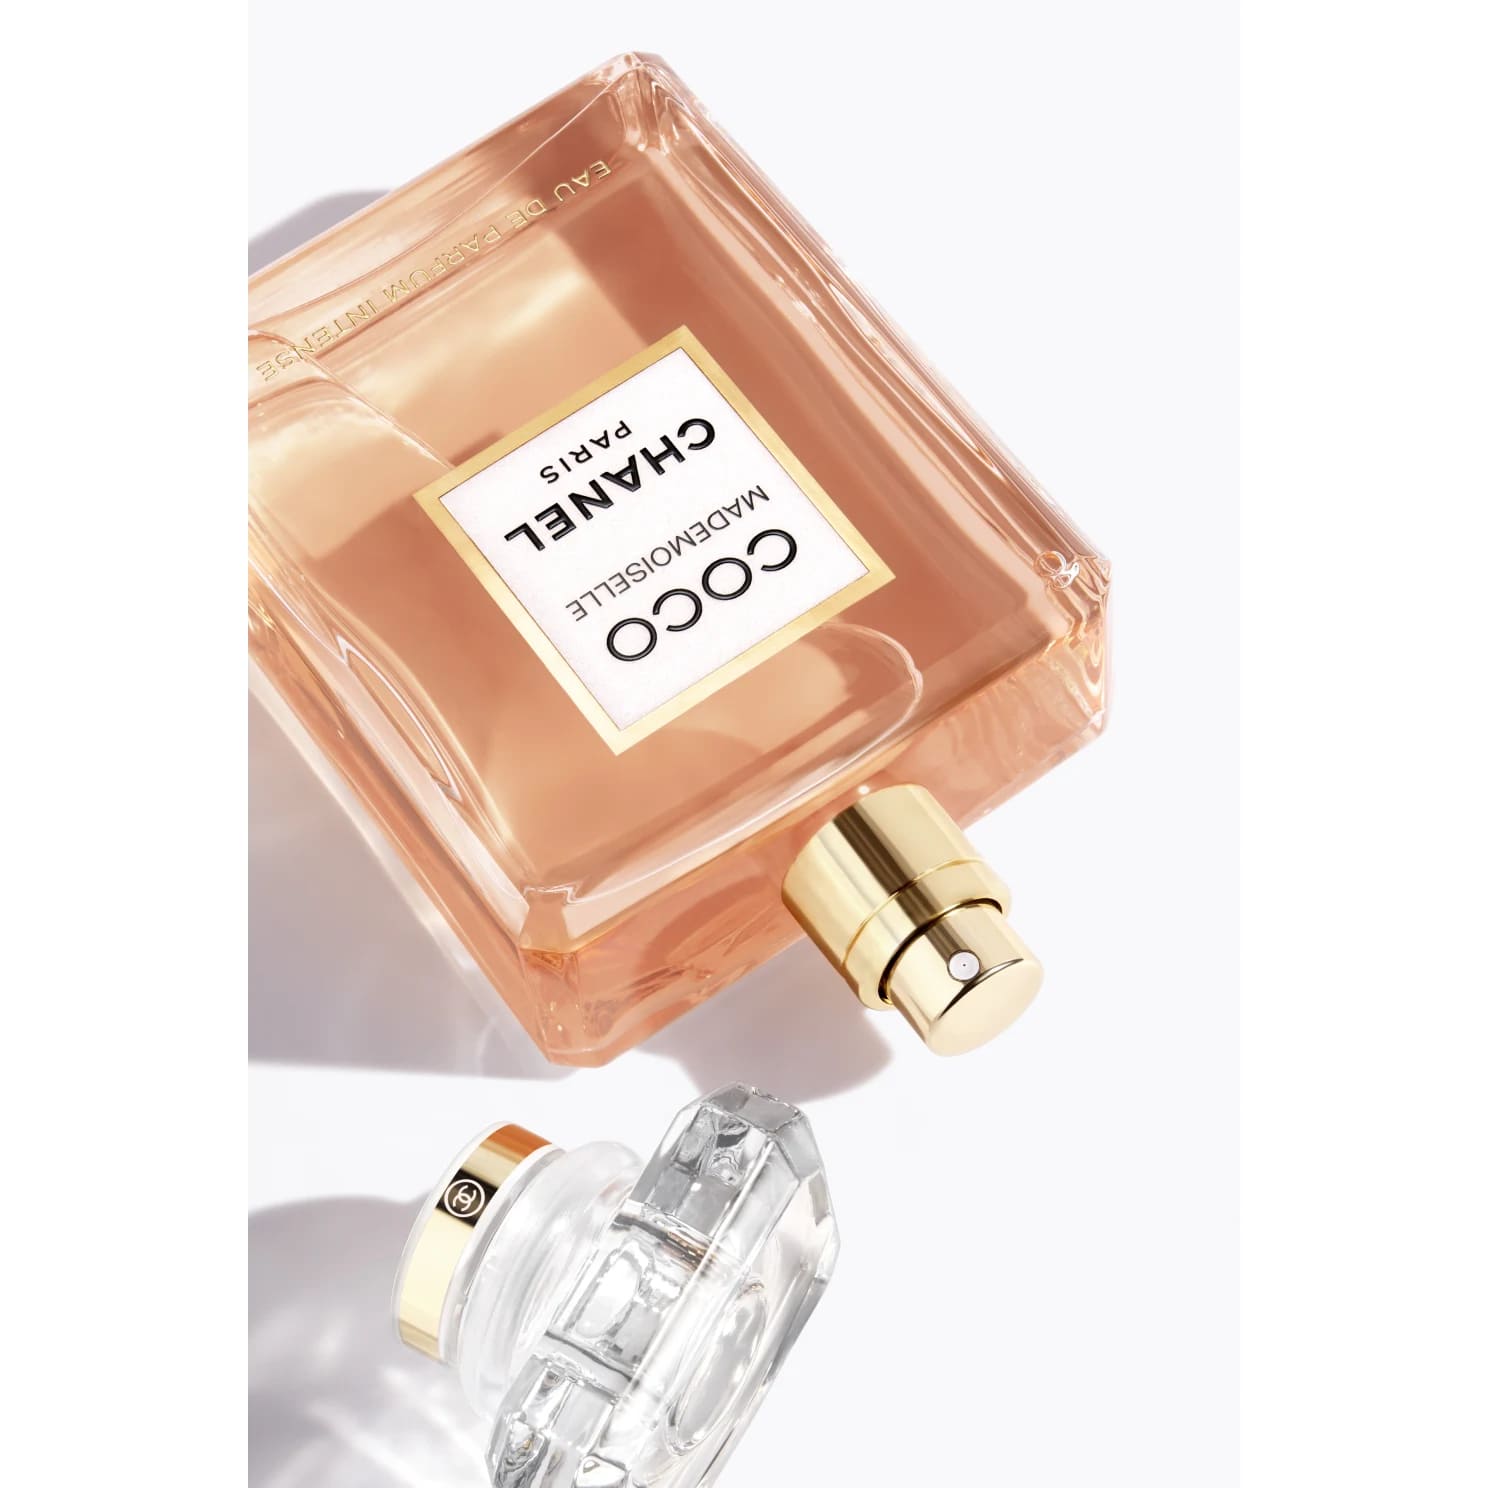 Coco Mademoiselle Perfume EDT Spray Intense for Women by Chanel